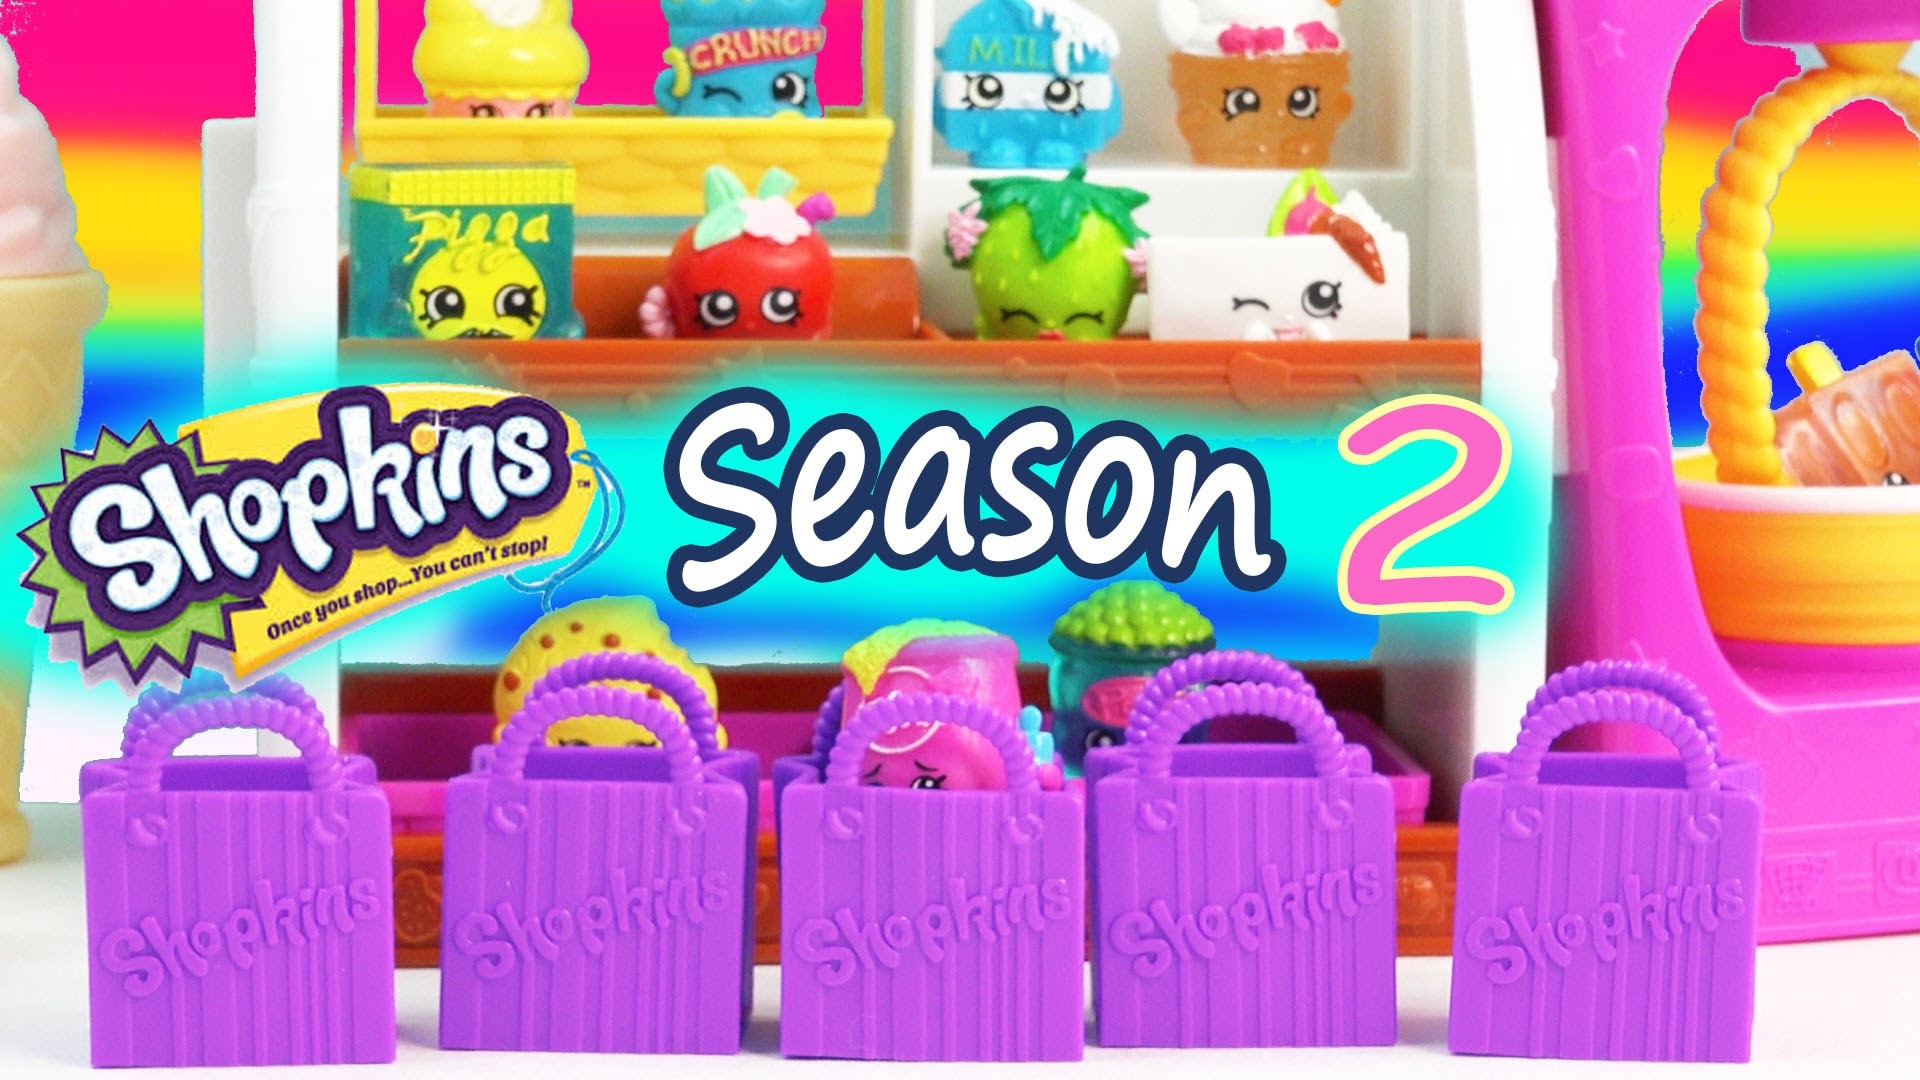 1920x1080 Shopkins Season 2 Two 5 Pack Mystery Surprise Purple Pink Blind Bag Basket  Opening Review - YouTube